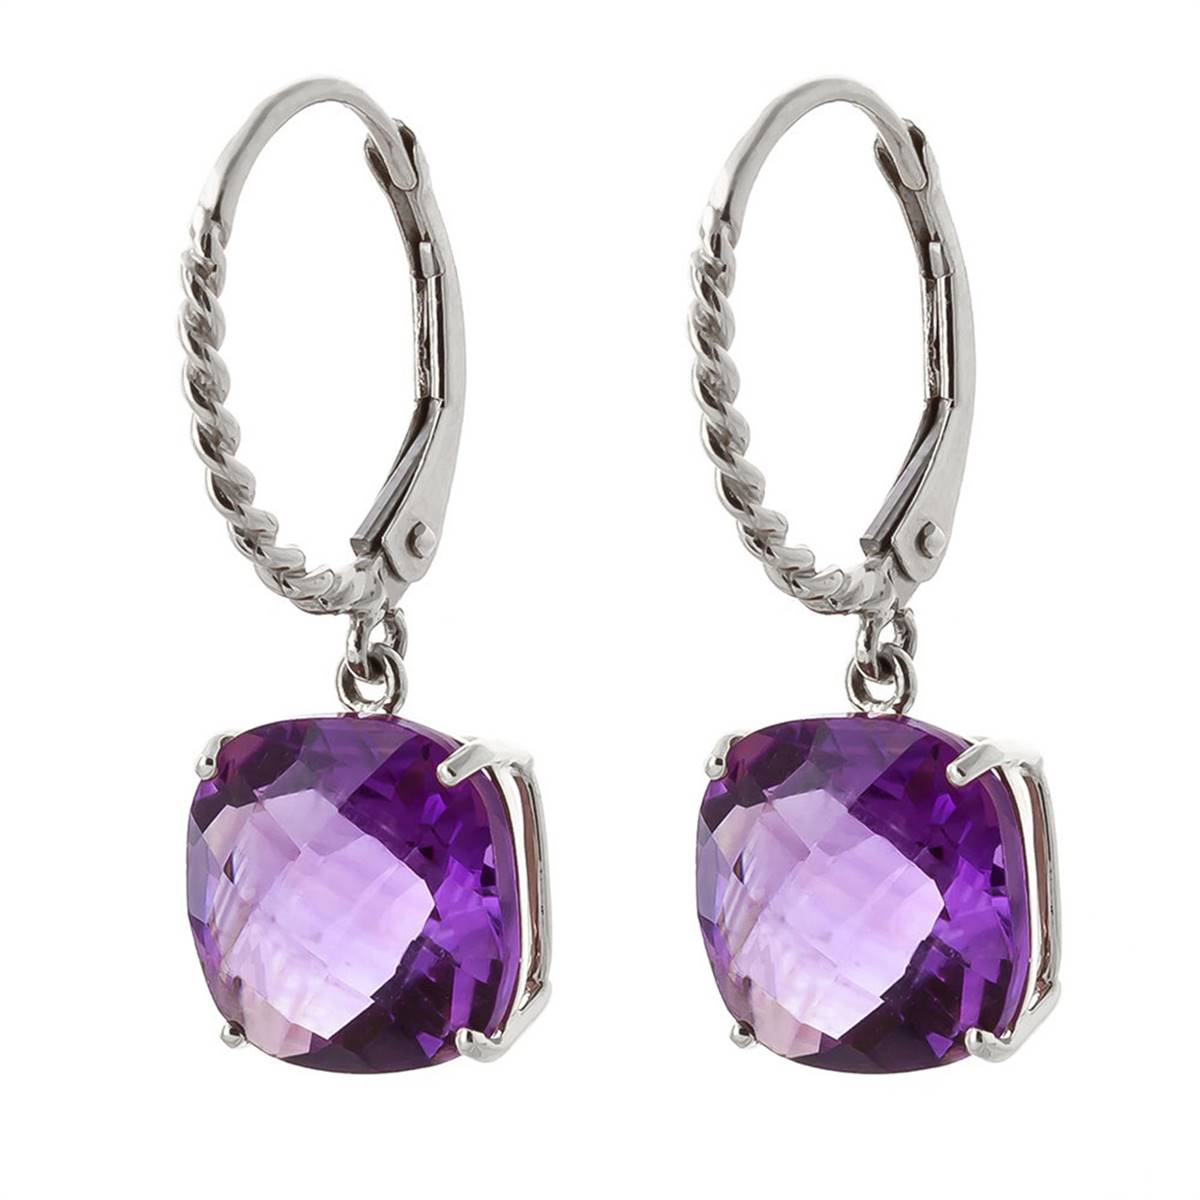 7.2 Carat 14K Solid White Gold Valentina Amethyst Earrings